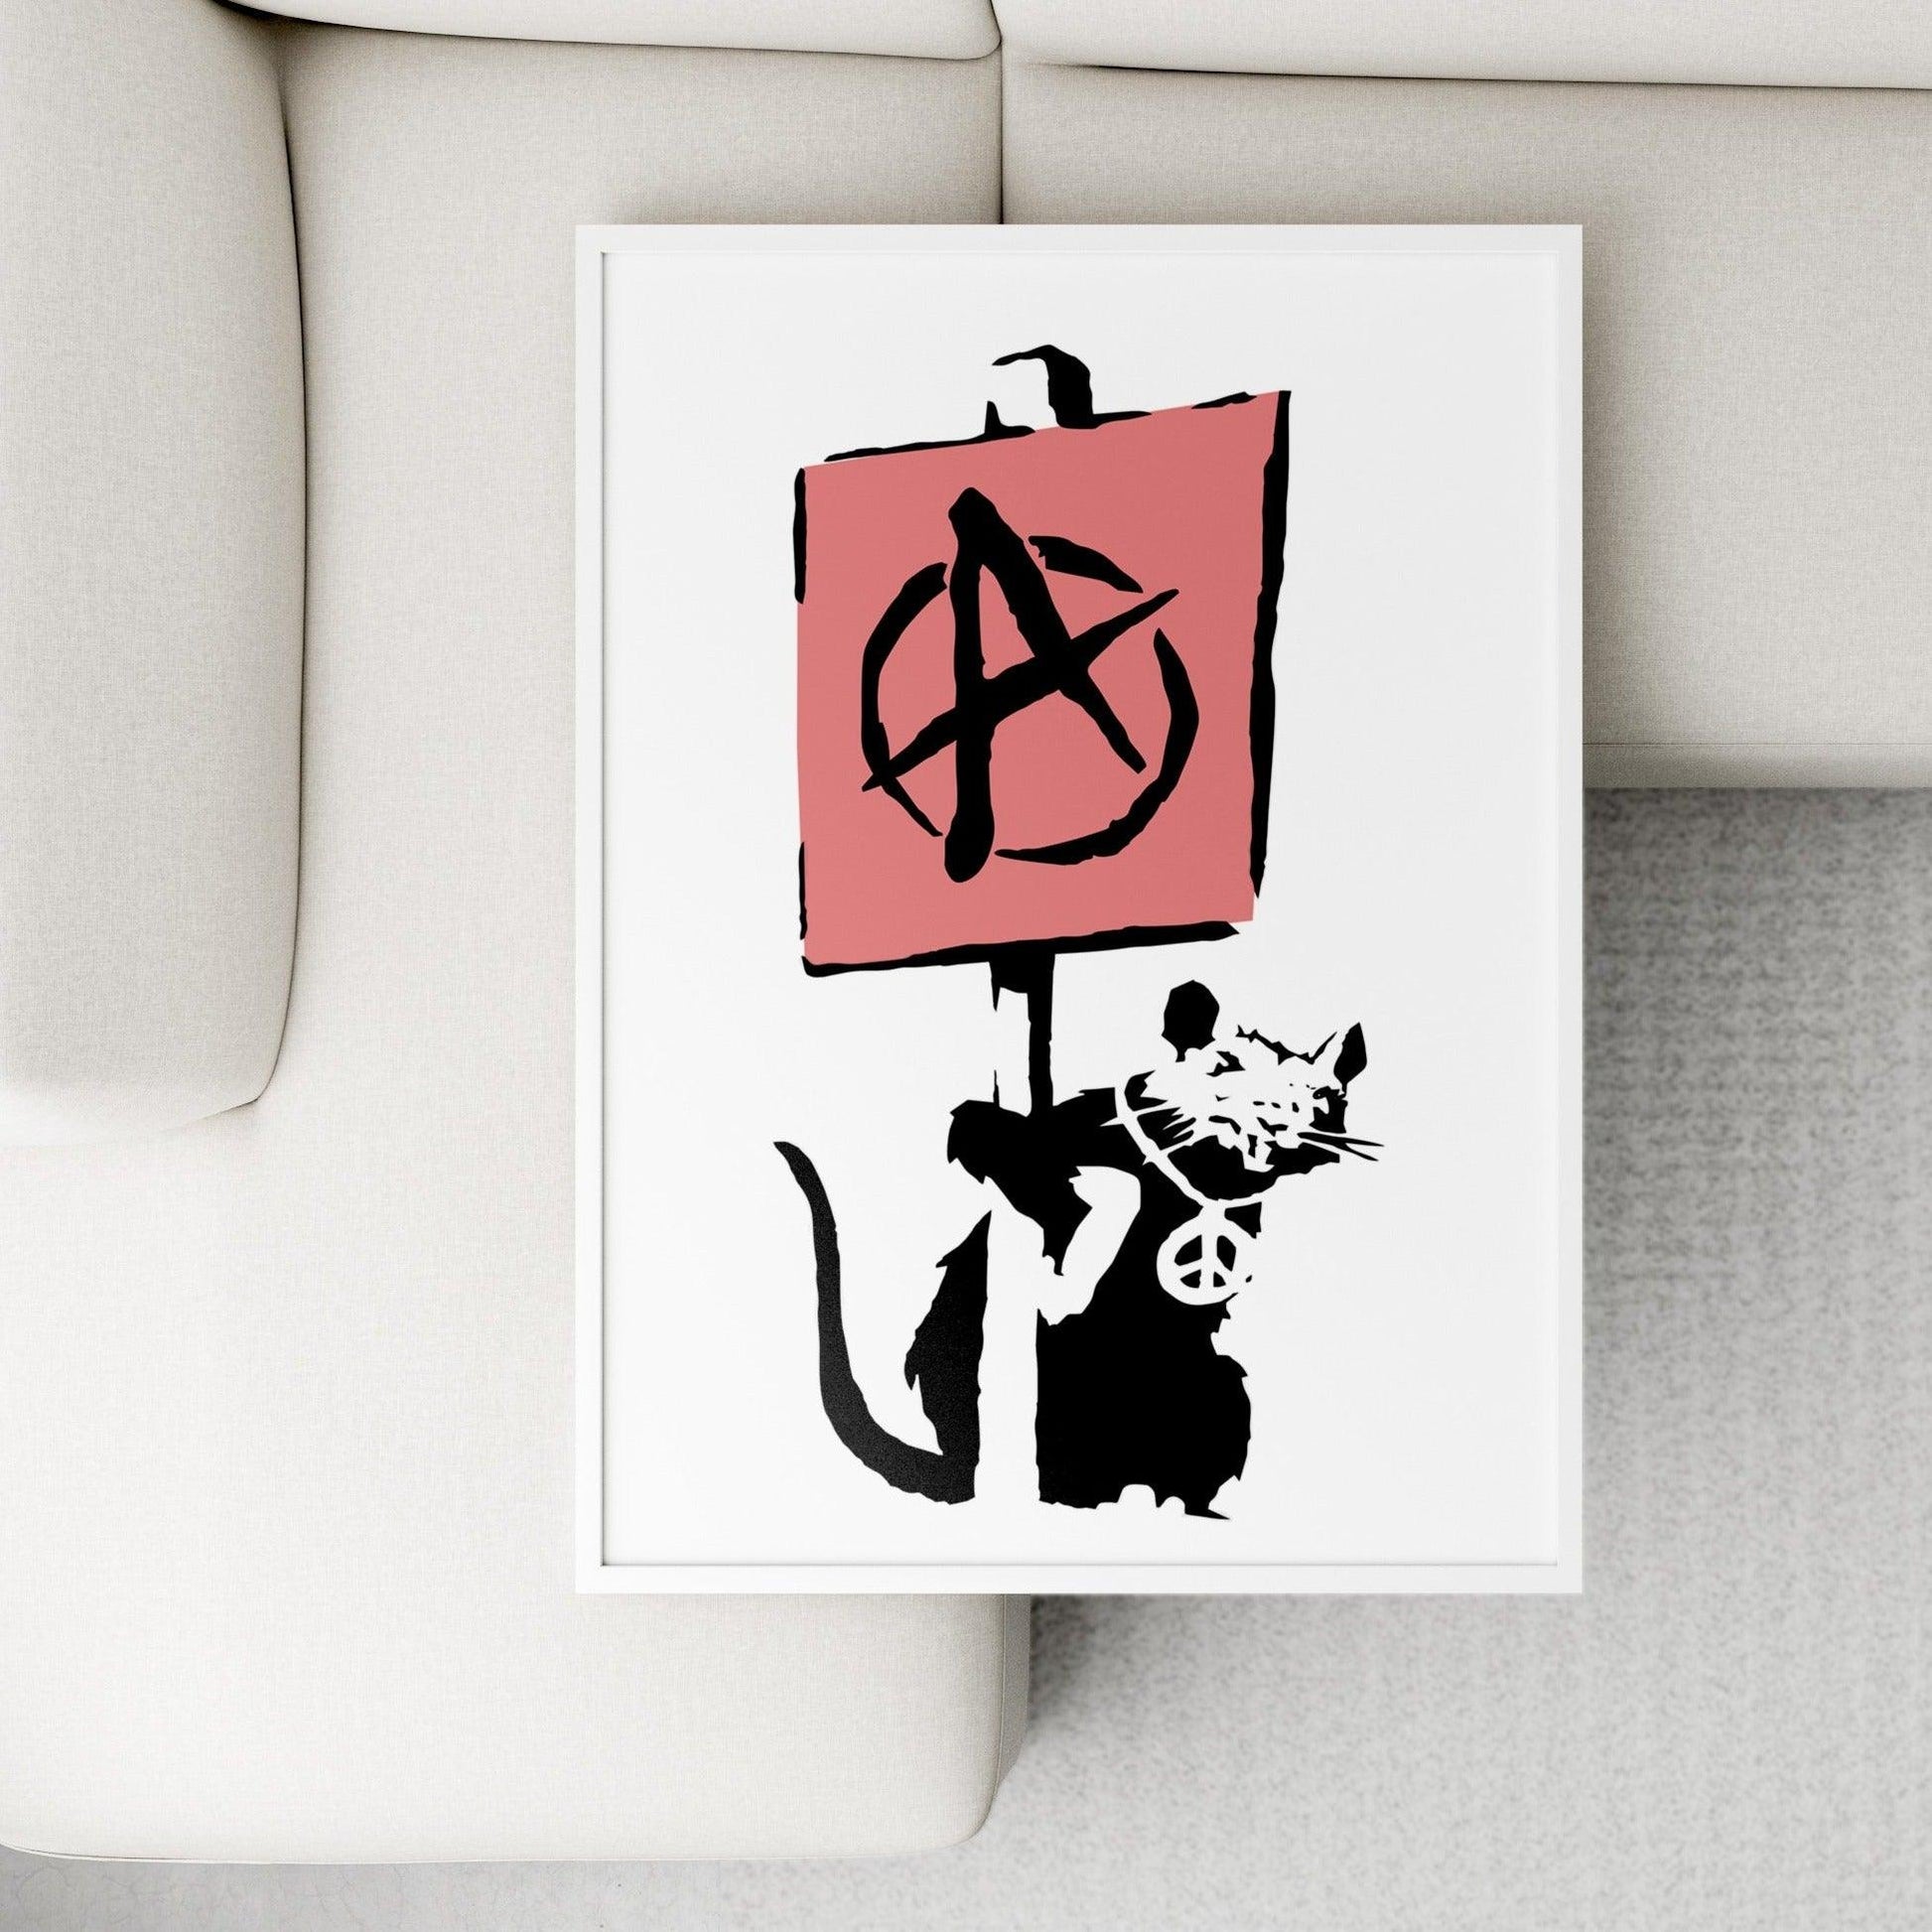 This is an original print by Banksy, one of the most renowned street artists in the world. Banksy is known for his subversive, political art. His rat stencils can be found all over the world and are often accompanied by graffiti tags. This high-quality print is a must-have for any street art lover or Banksy fan. - 98types